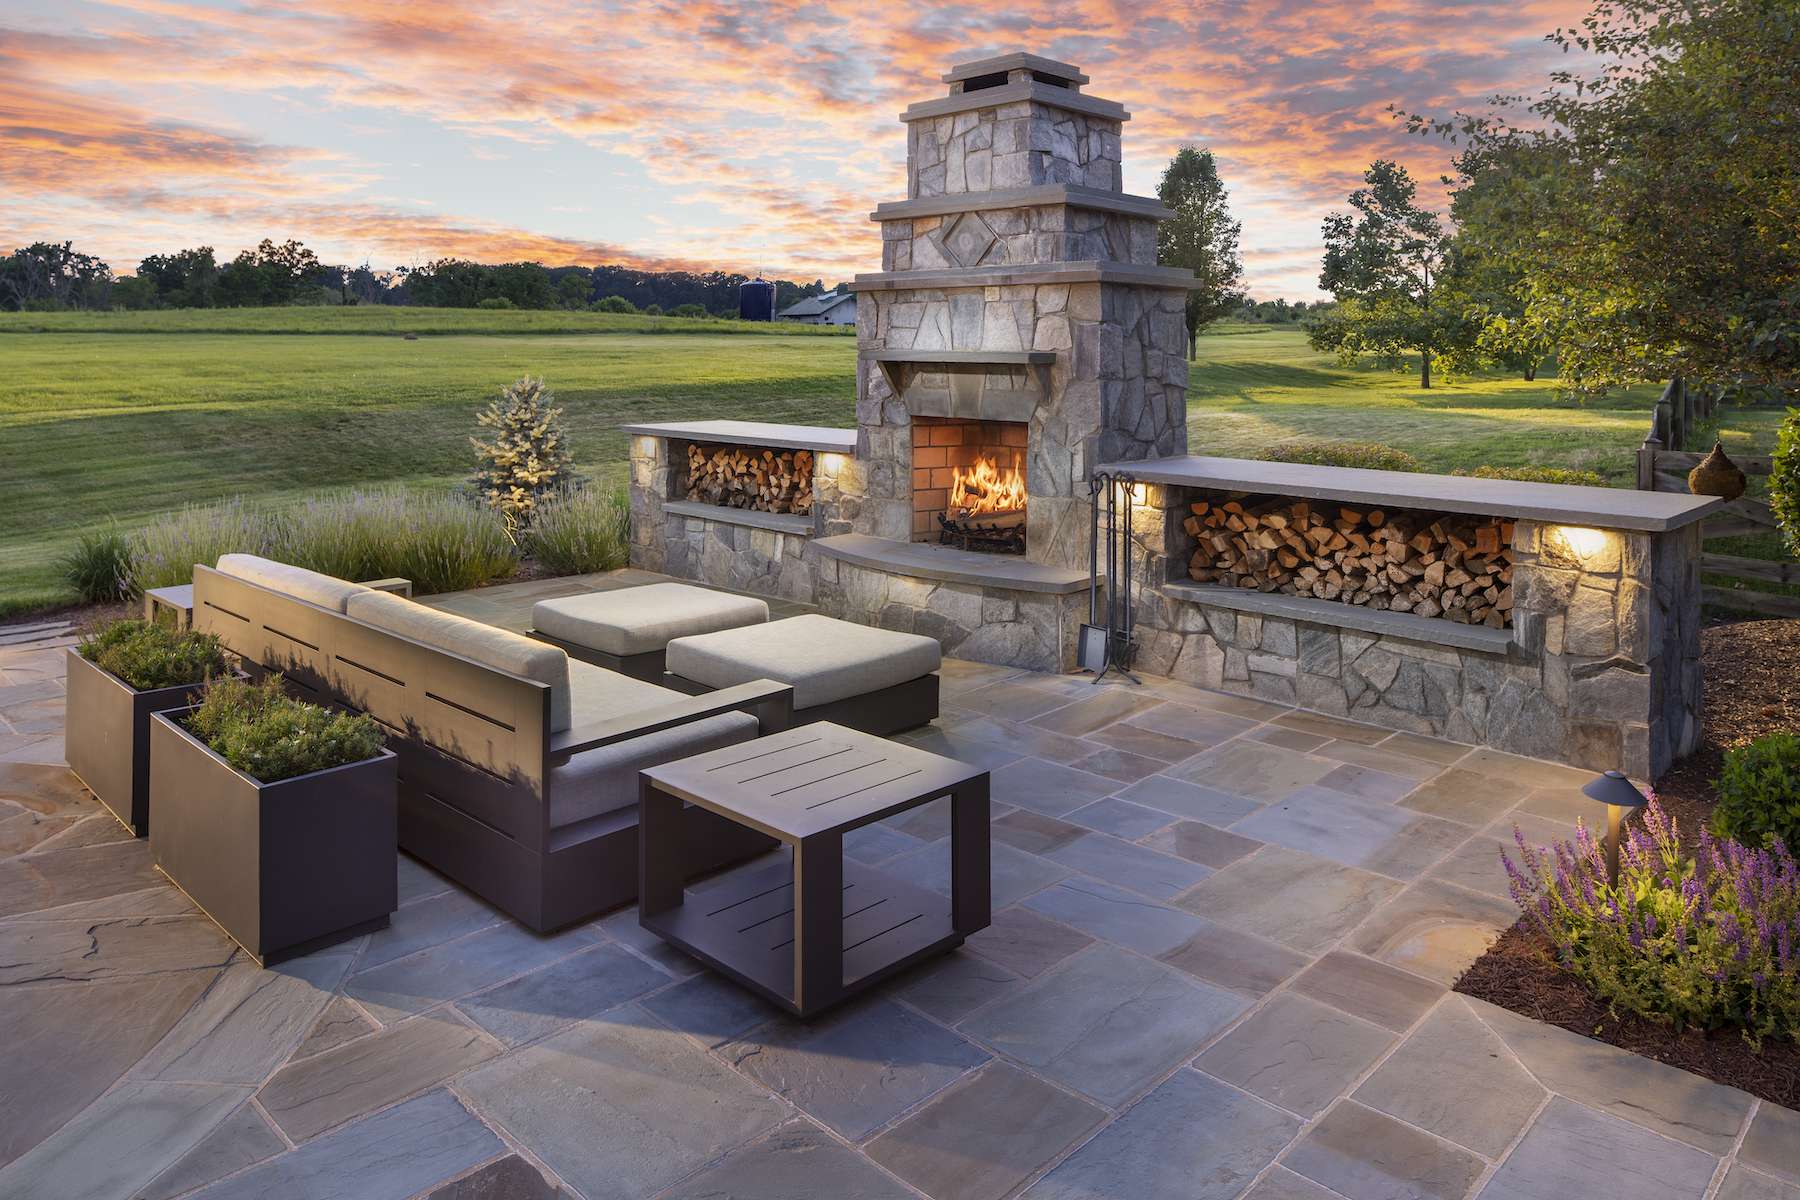 10 Fabulous Designs For Your Outdoor Fireplace | vlr.eng.br